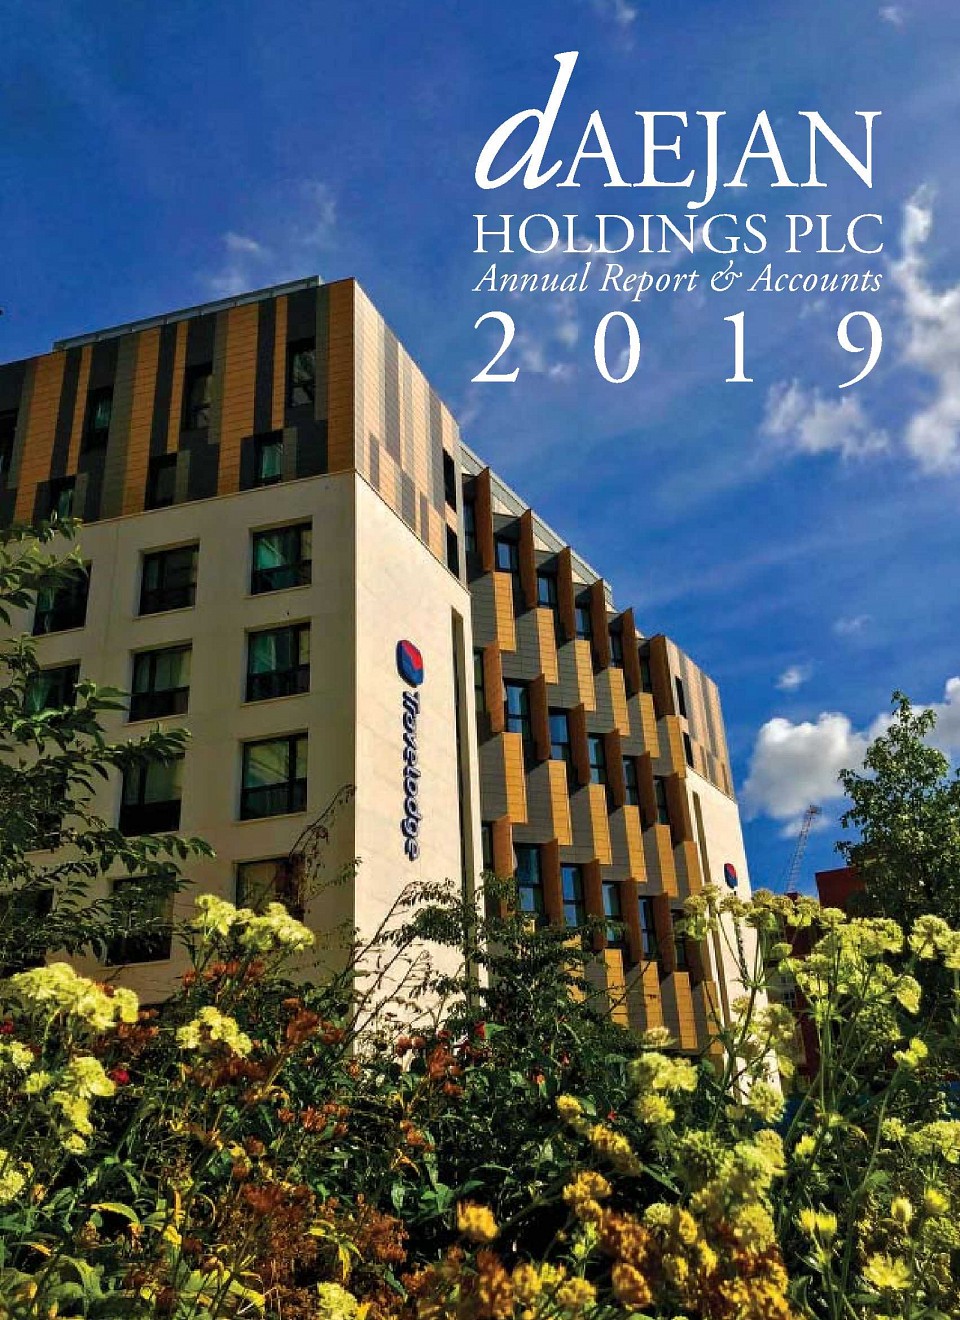 View our Annual Report & Accounts 2019